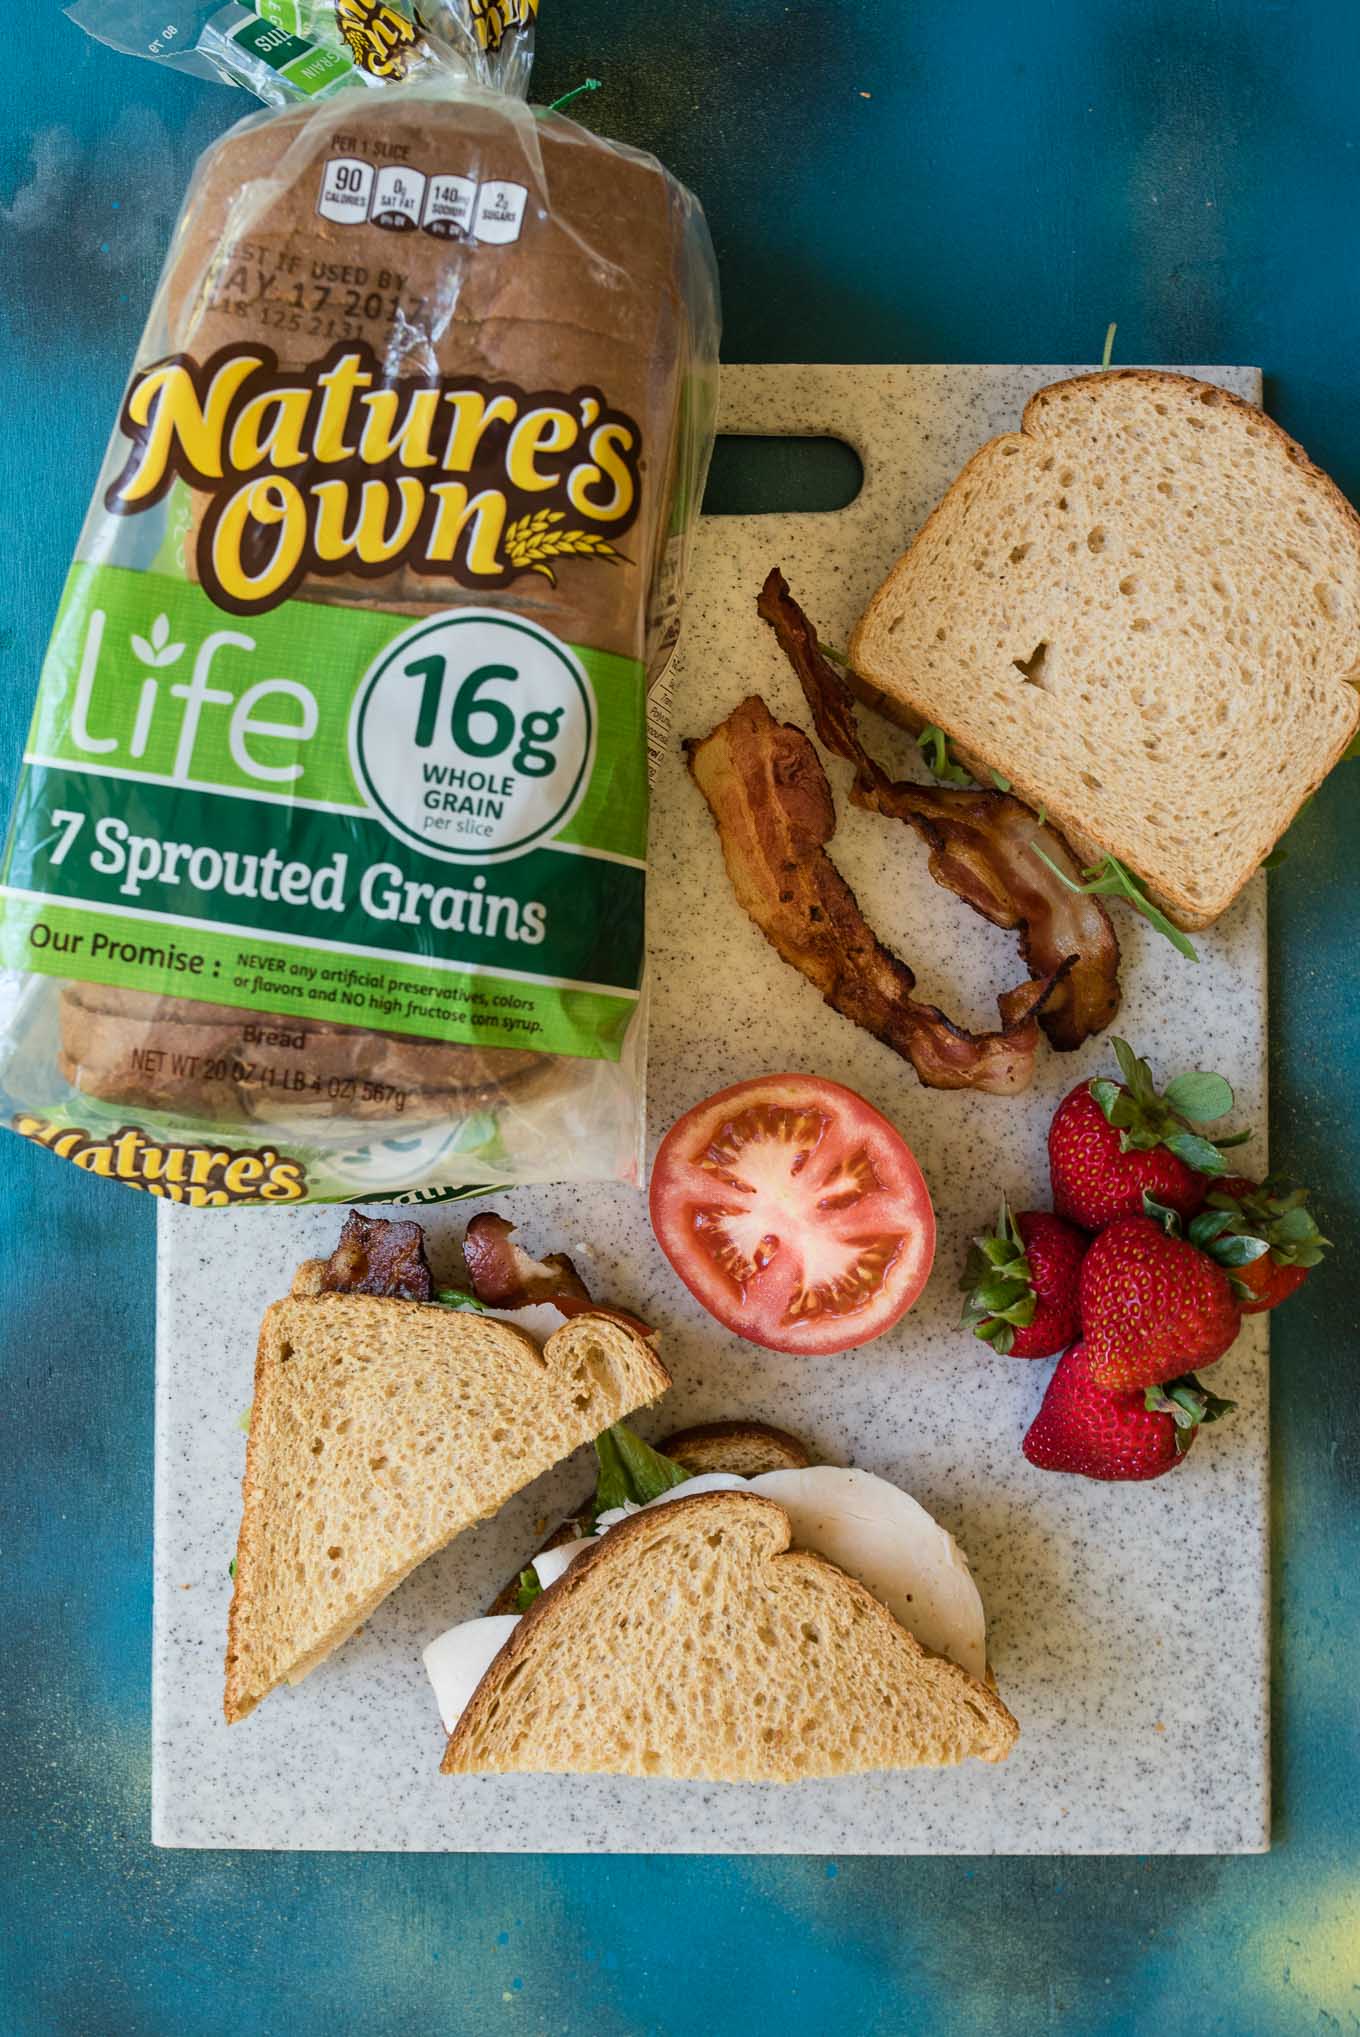 Turkey Caesar BLT Sandwiches are simple to prepare and great to pack for a dinner at the pool or a family picnic.